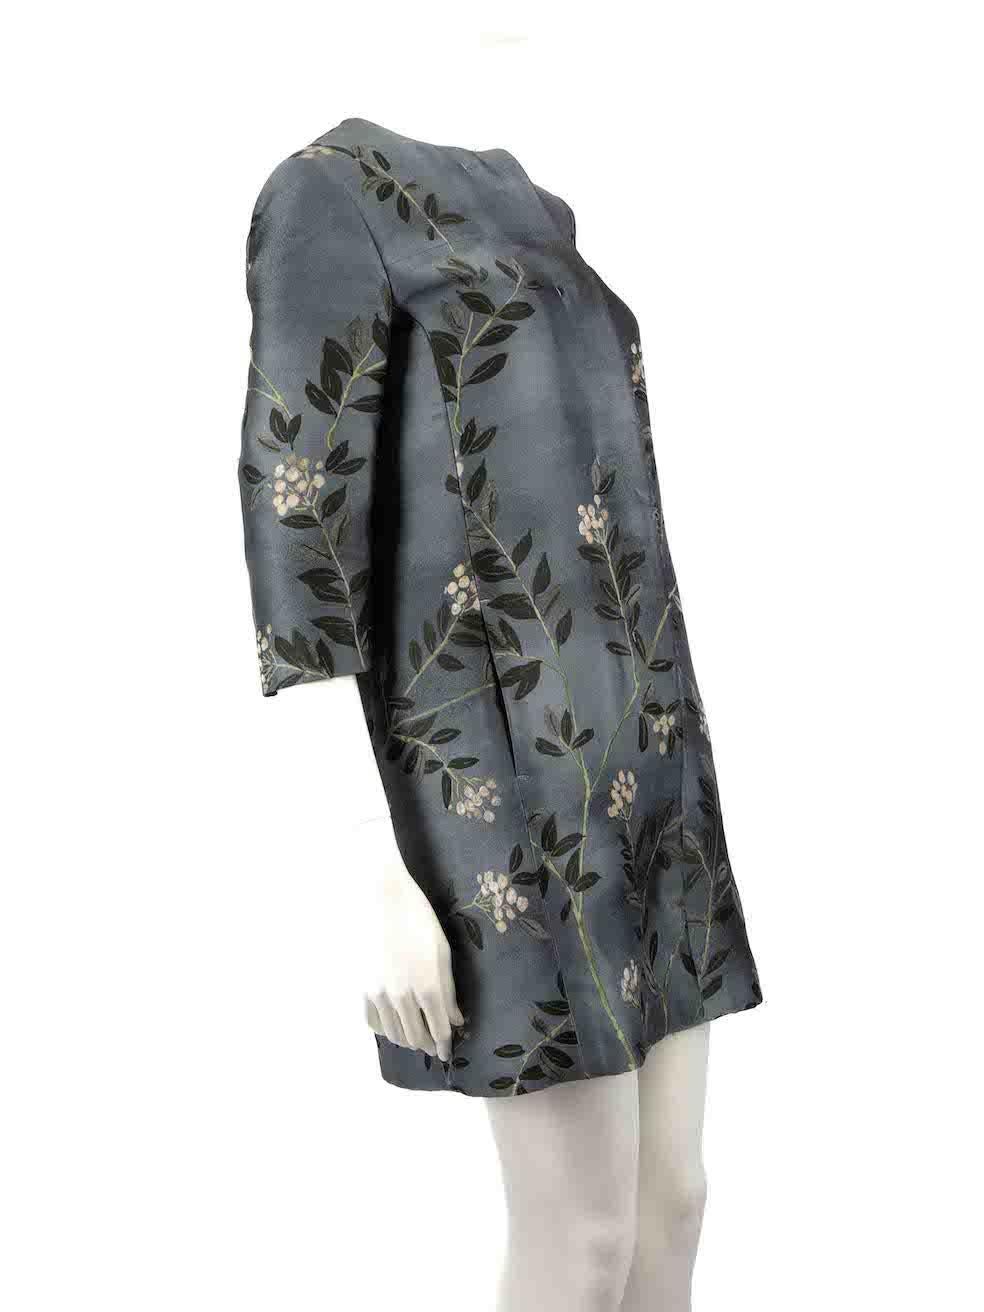 CONDITION is Good. General wear to coat is evident. Moderate signs of wear to the front, back and sleeves with plucks and pulls to the weave on this used 'S Max Mara designer resale item.
 
 Details
 Blue
 Polyester
 Coat
 Jacquard floral pattern
